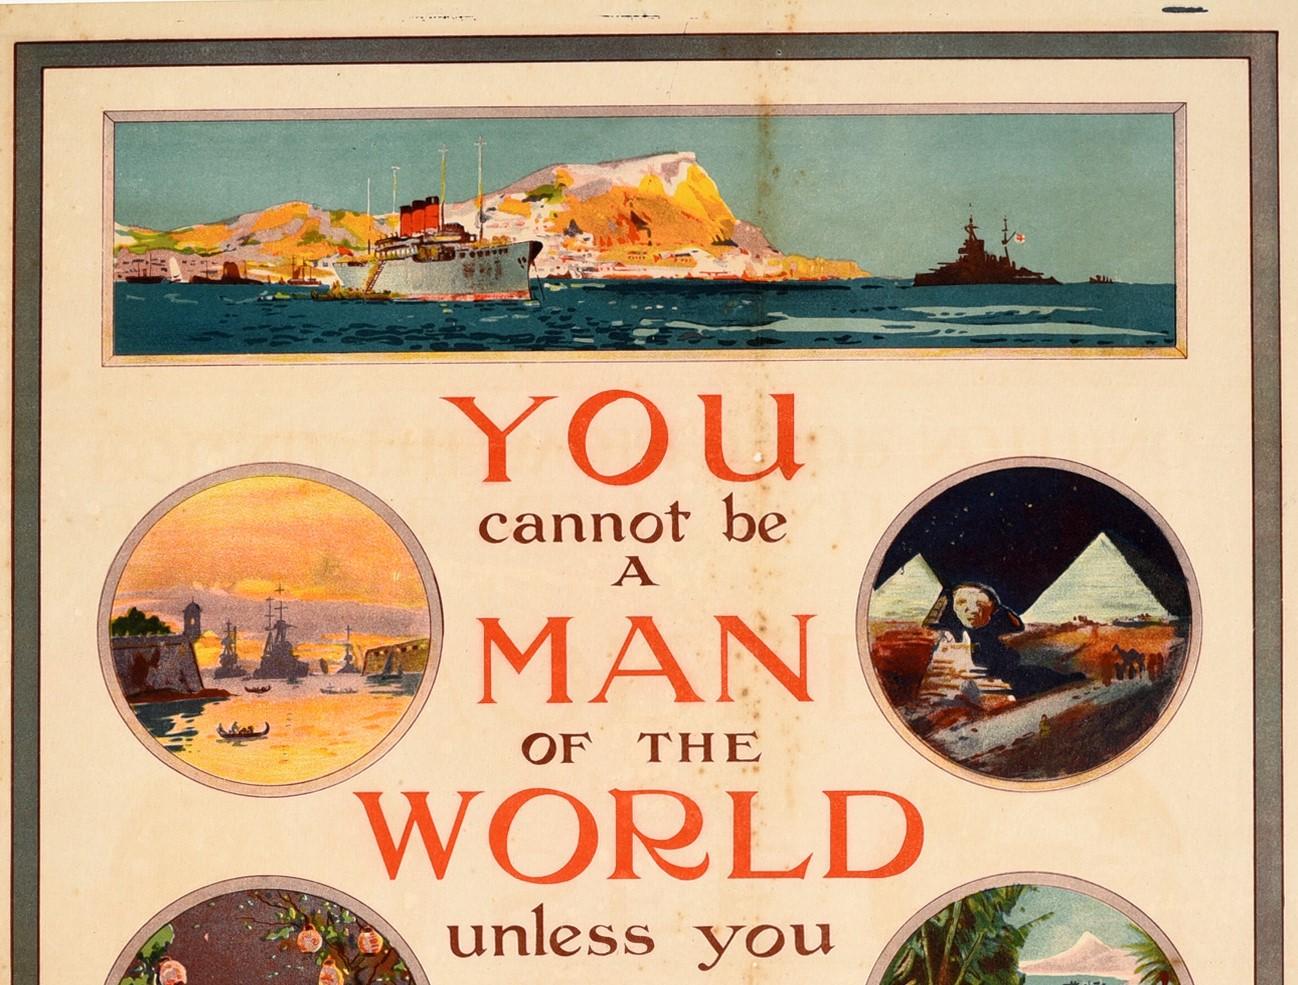 Original antique World War One period military recruitment poster - You cannot be a man of the world unless you see the world Join the army and travel round the world for nothing - featuring a great design with illustrations between the stylised